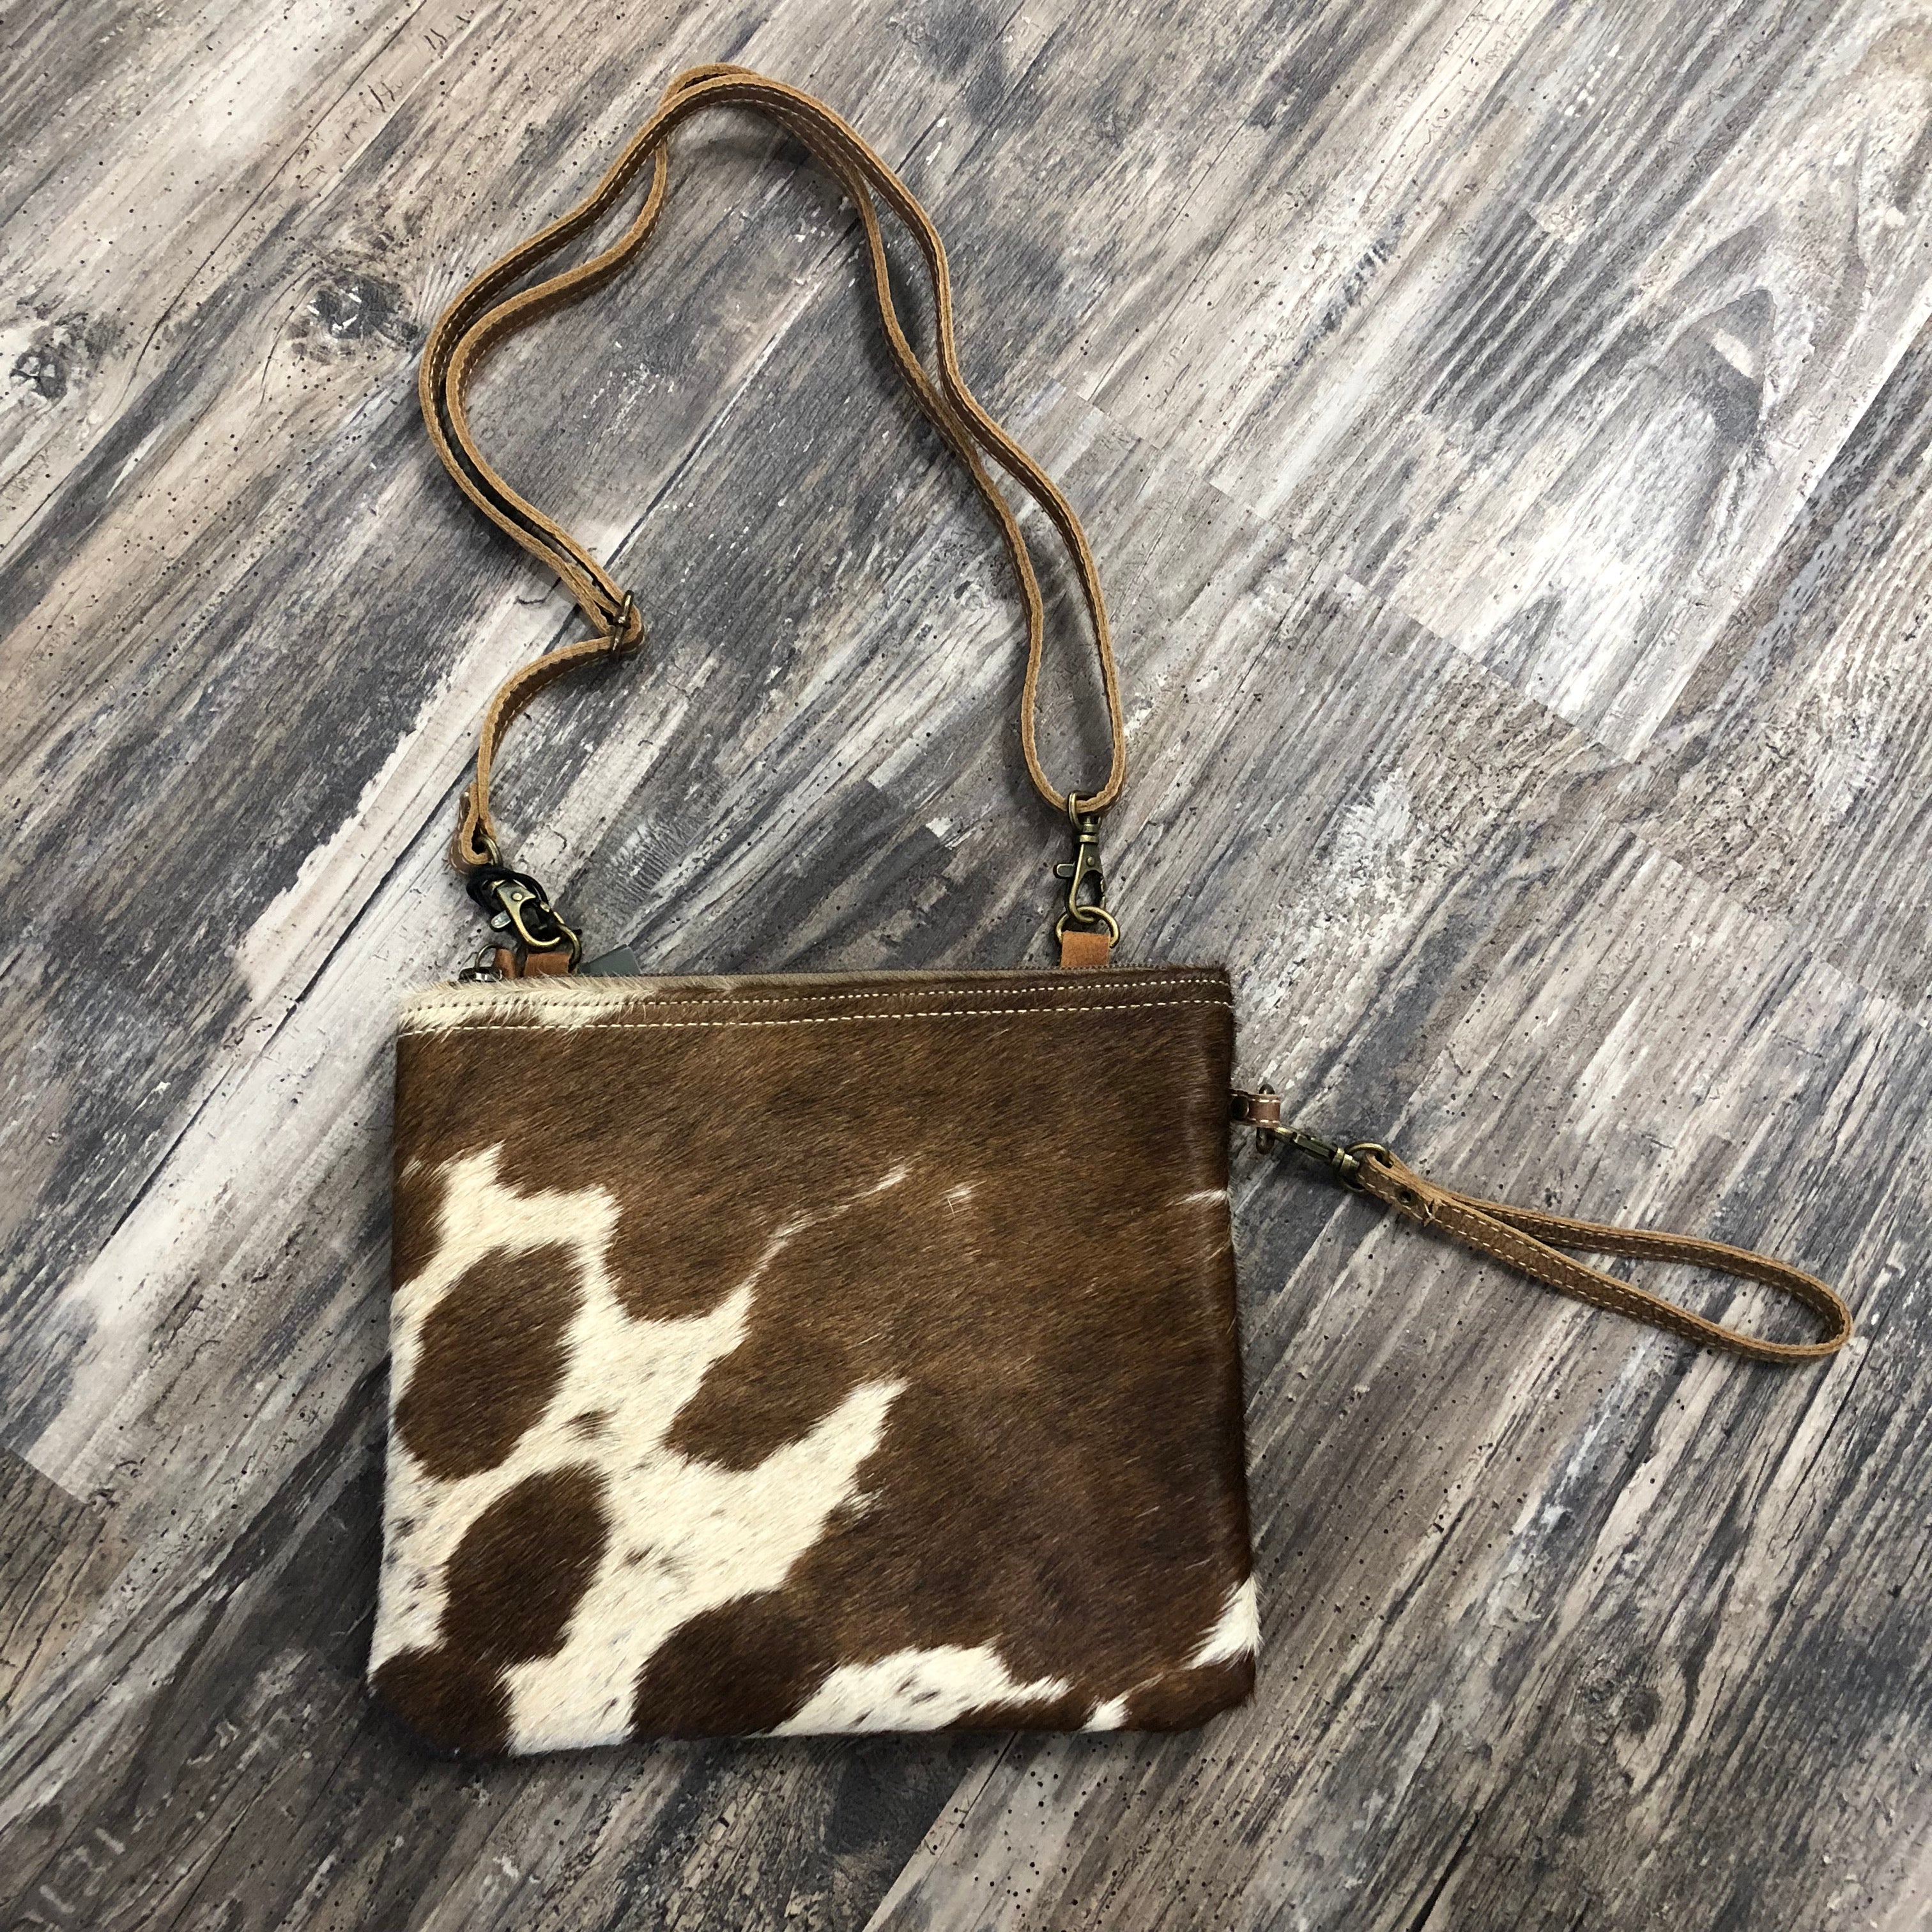 Brown and White Cowhide Satchel